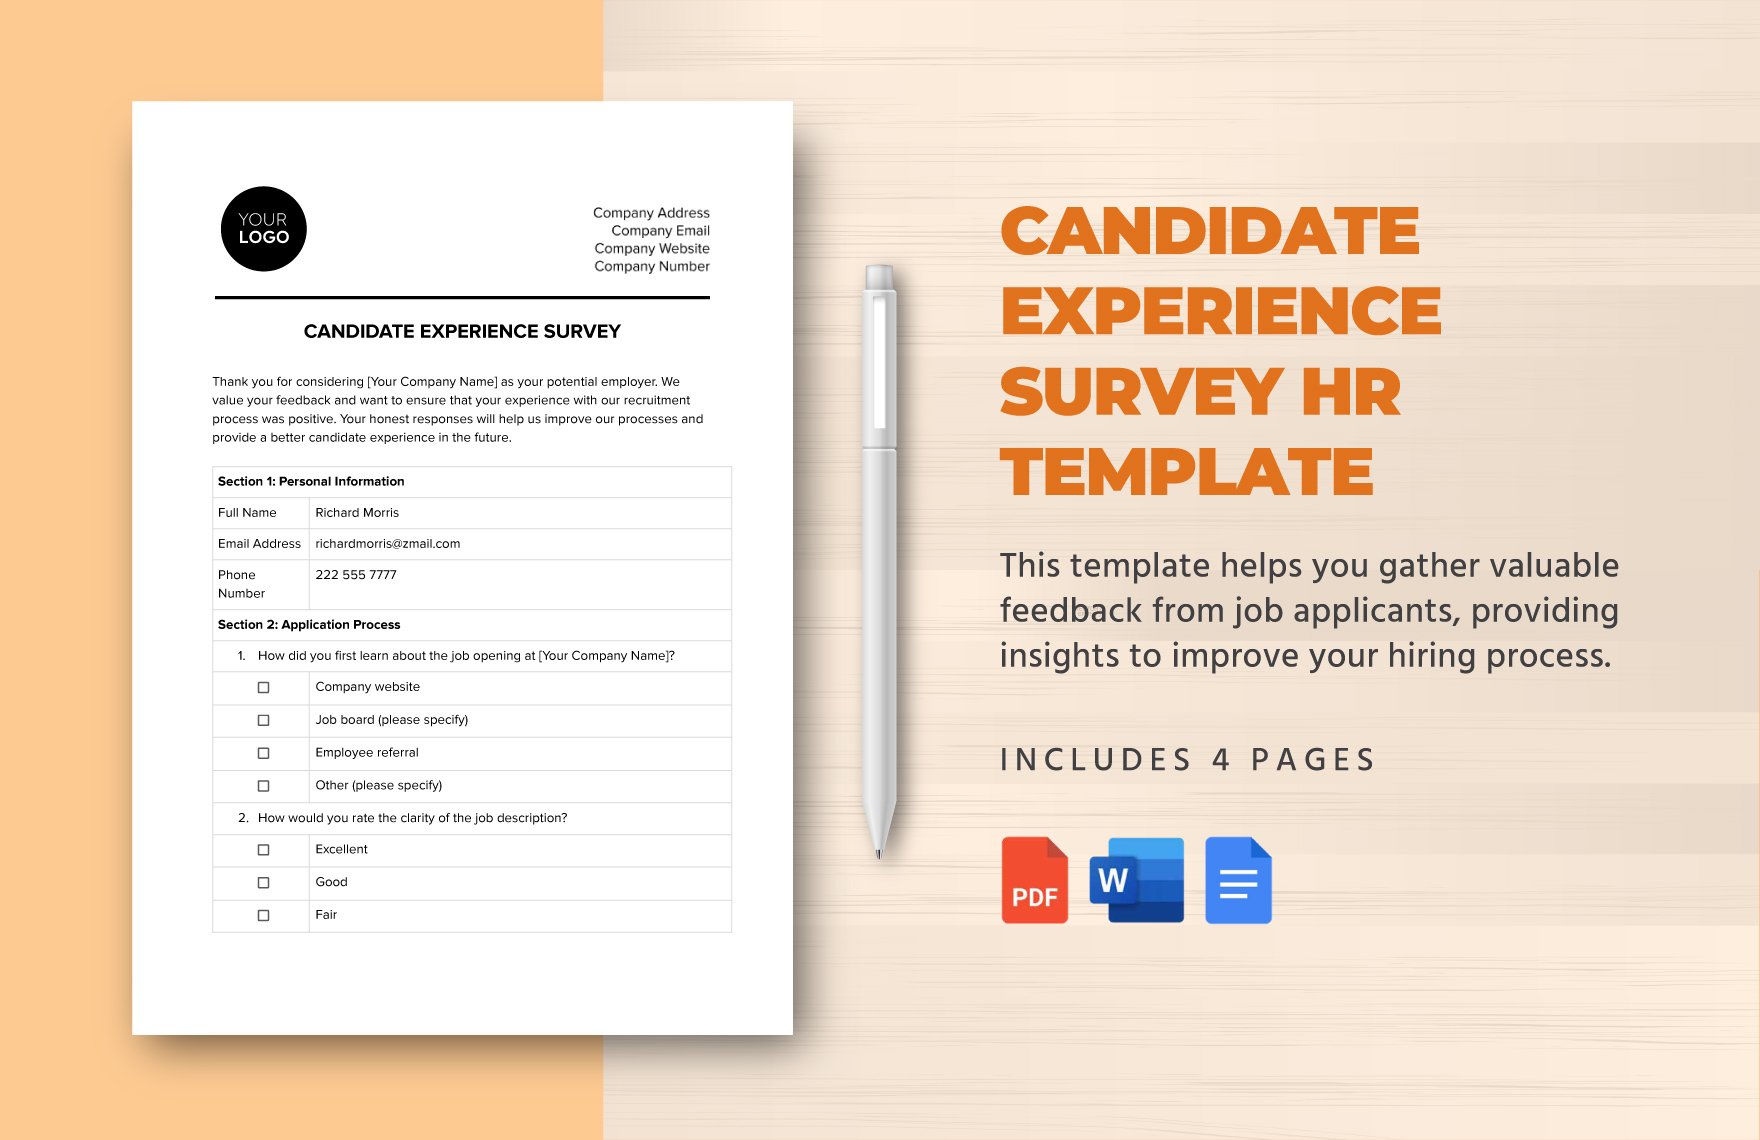 Candidate Experience Survey HR Template in Word, Google Docs, PDF